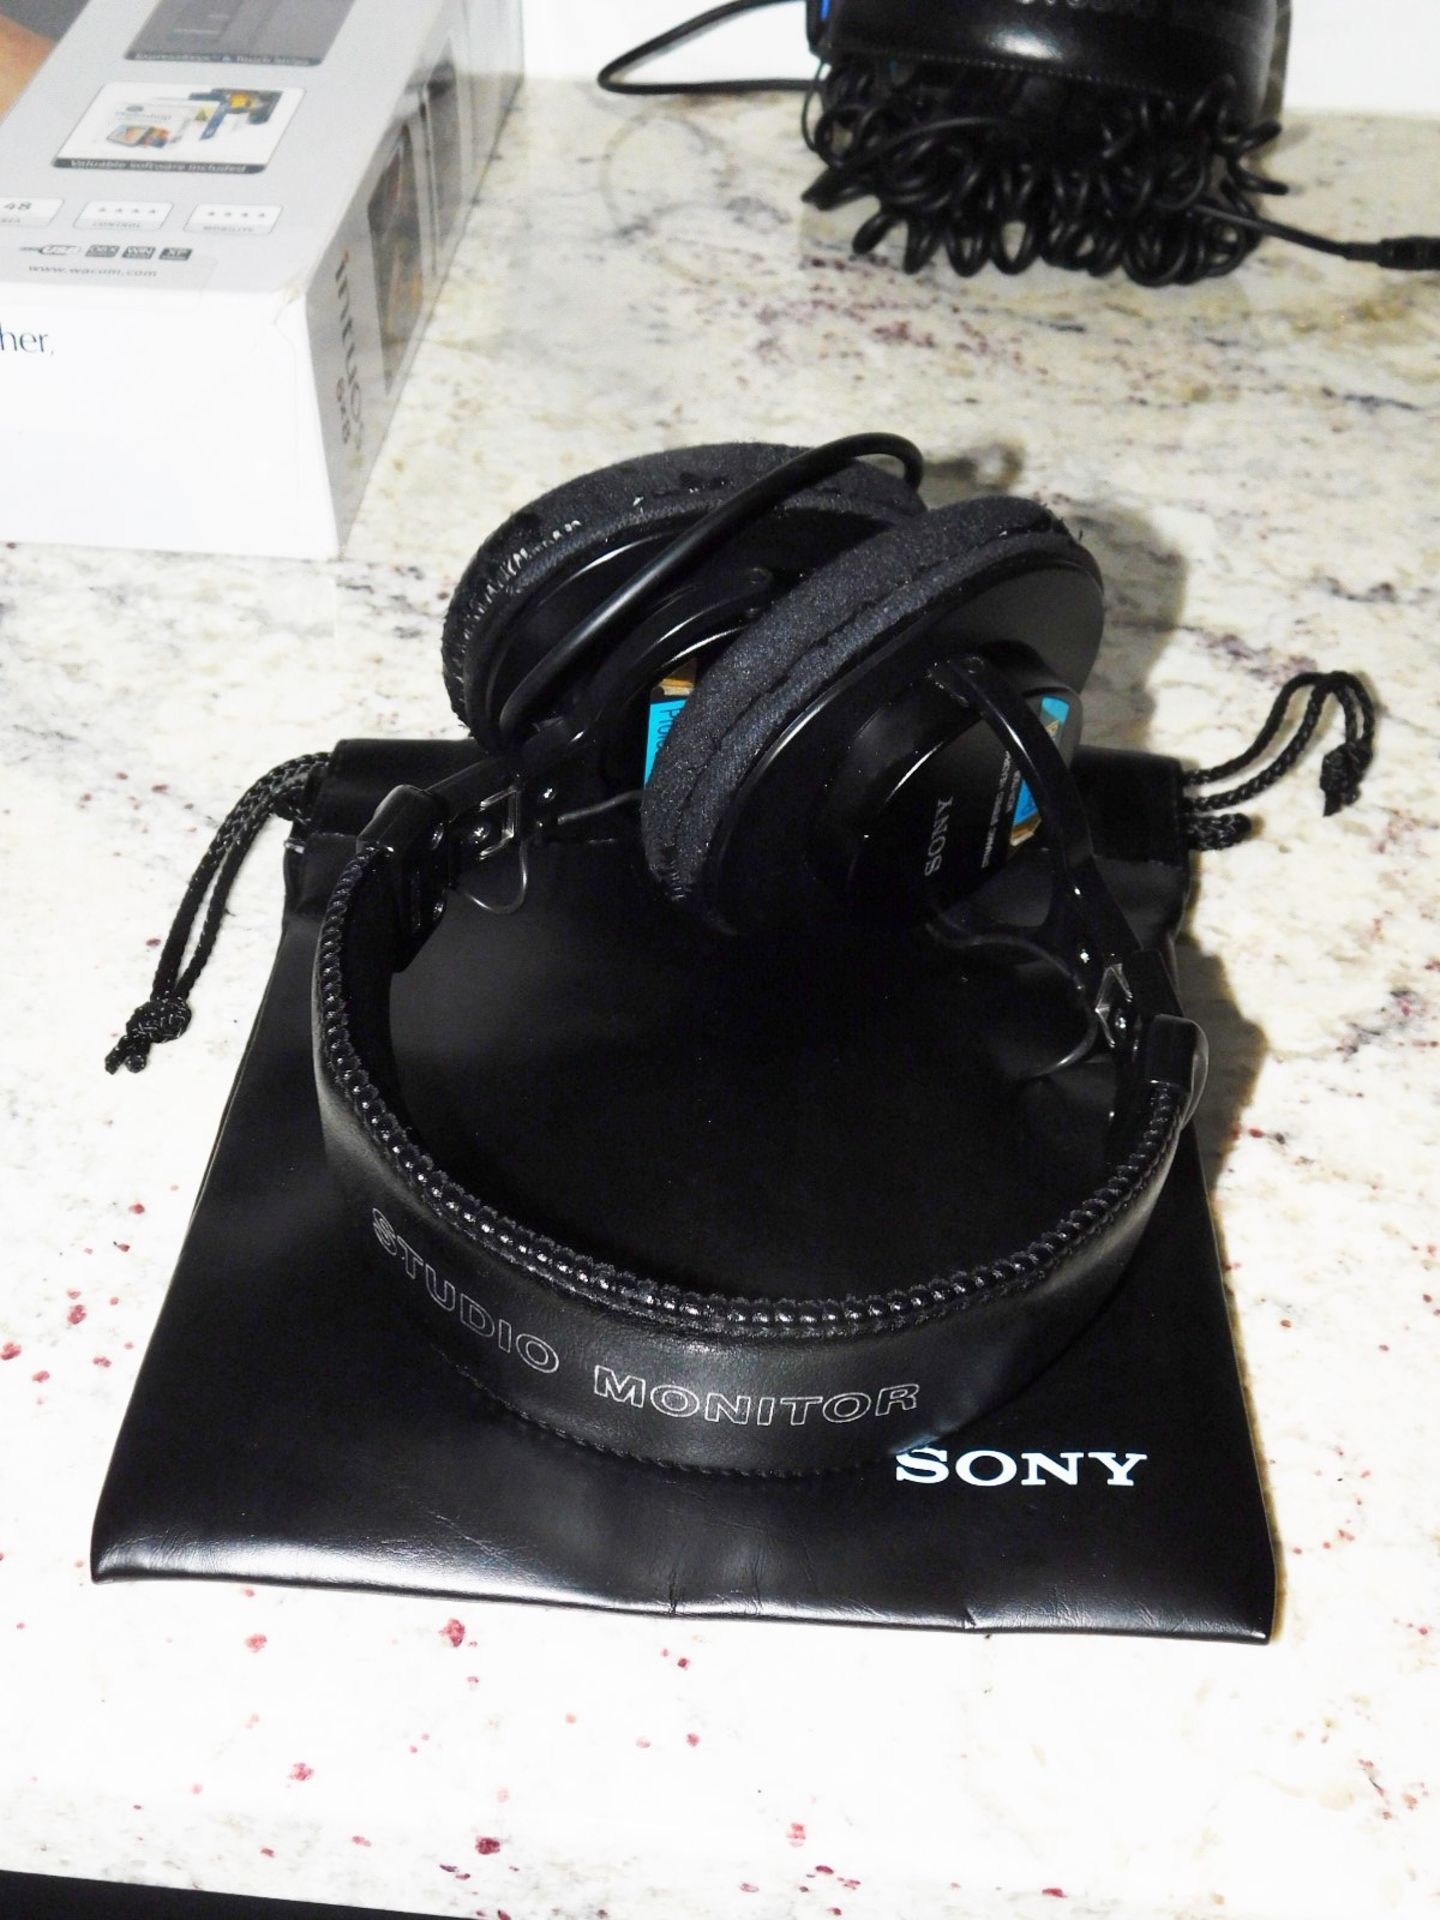 SONY PROFESSIONAL MODEL MDR 7506 HEADSET